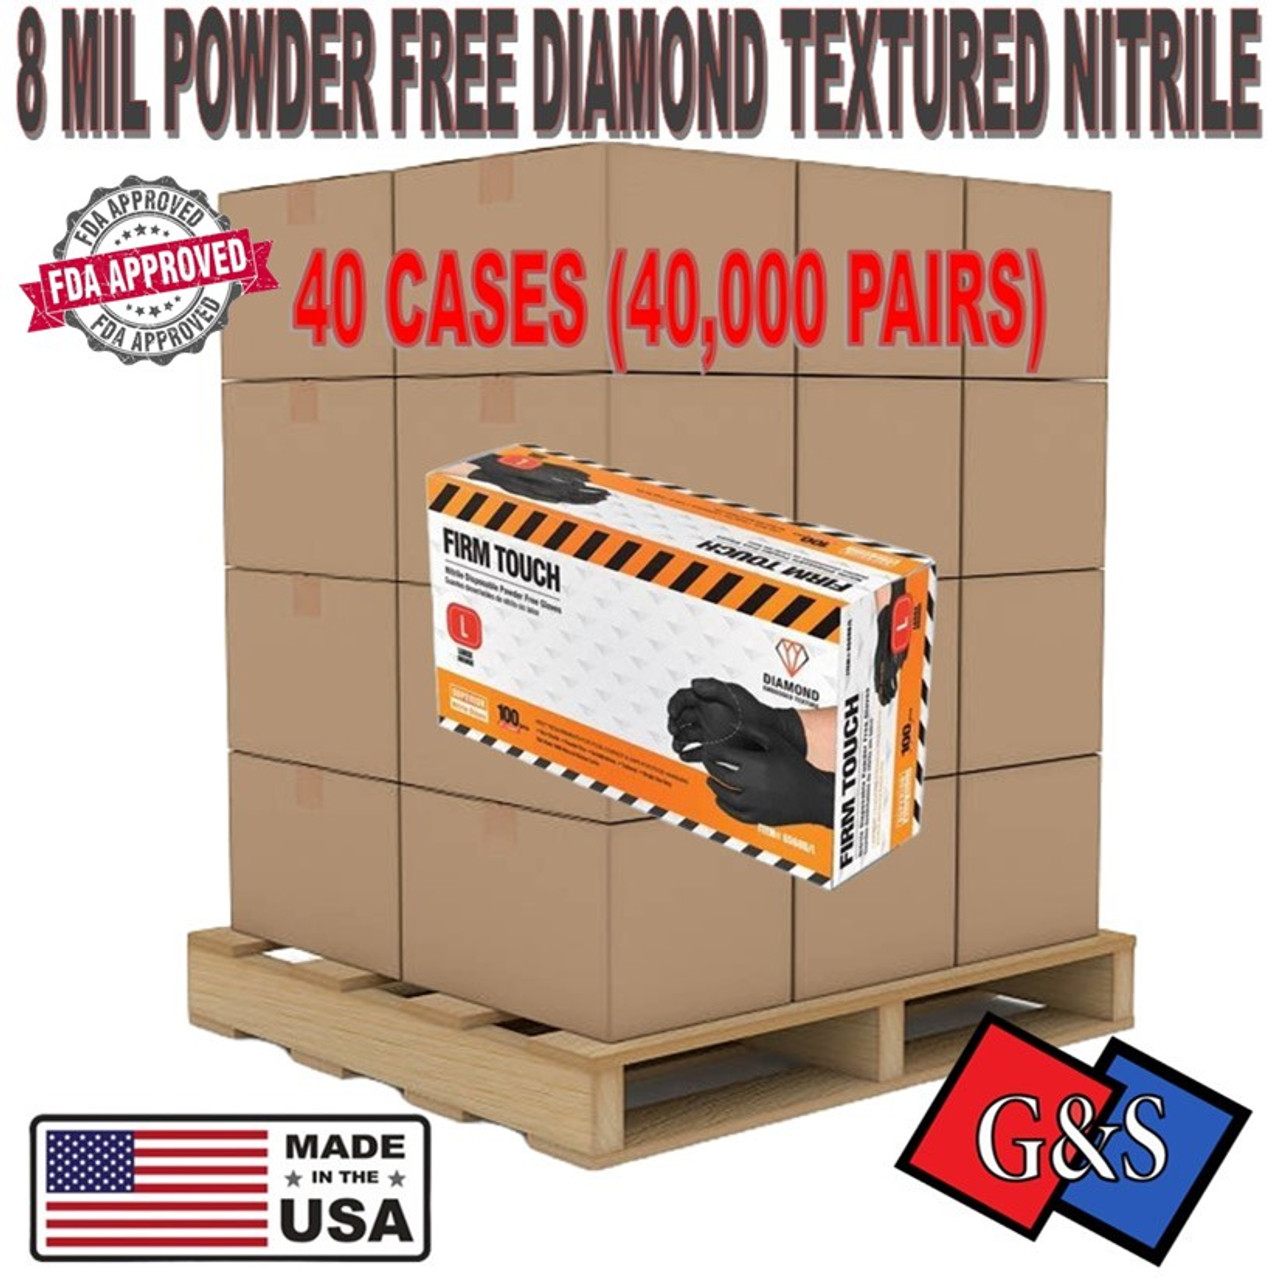 Bulk Pricing Full Pallet Firm Touch Black 8mil  Dimond Textured Nitrile Gloves(40 cases), FREE Shipping